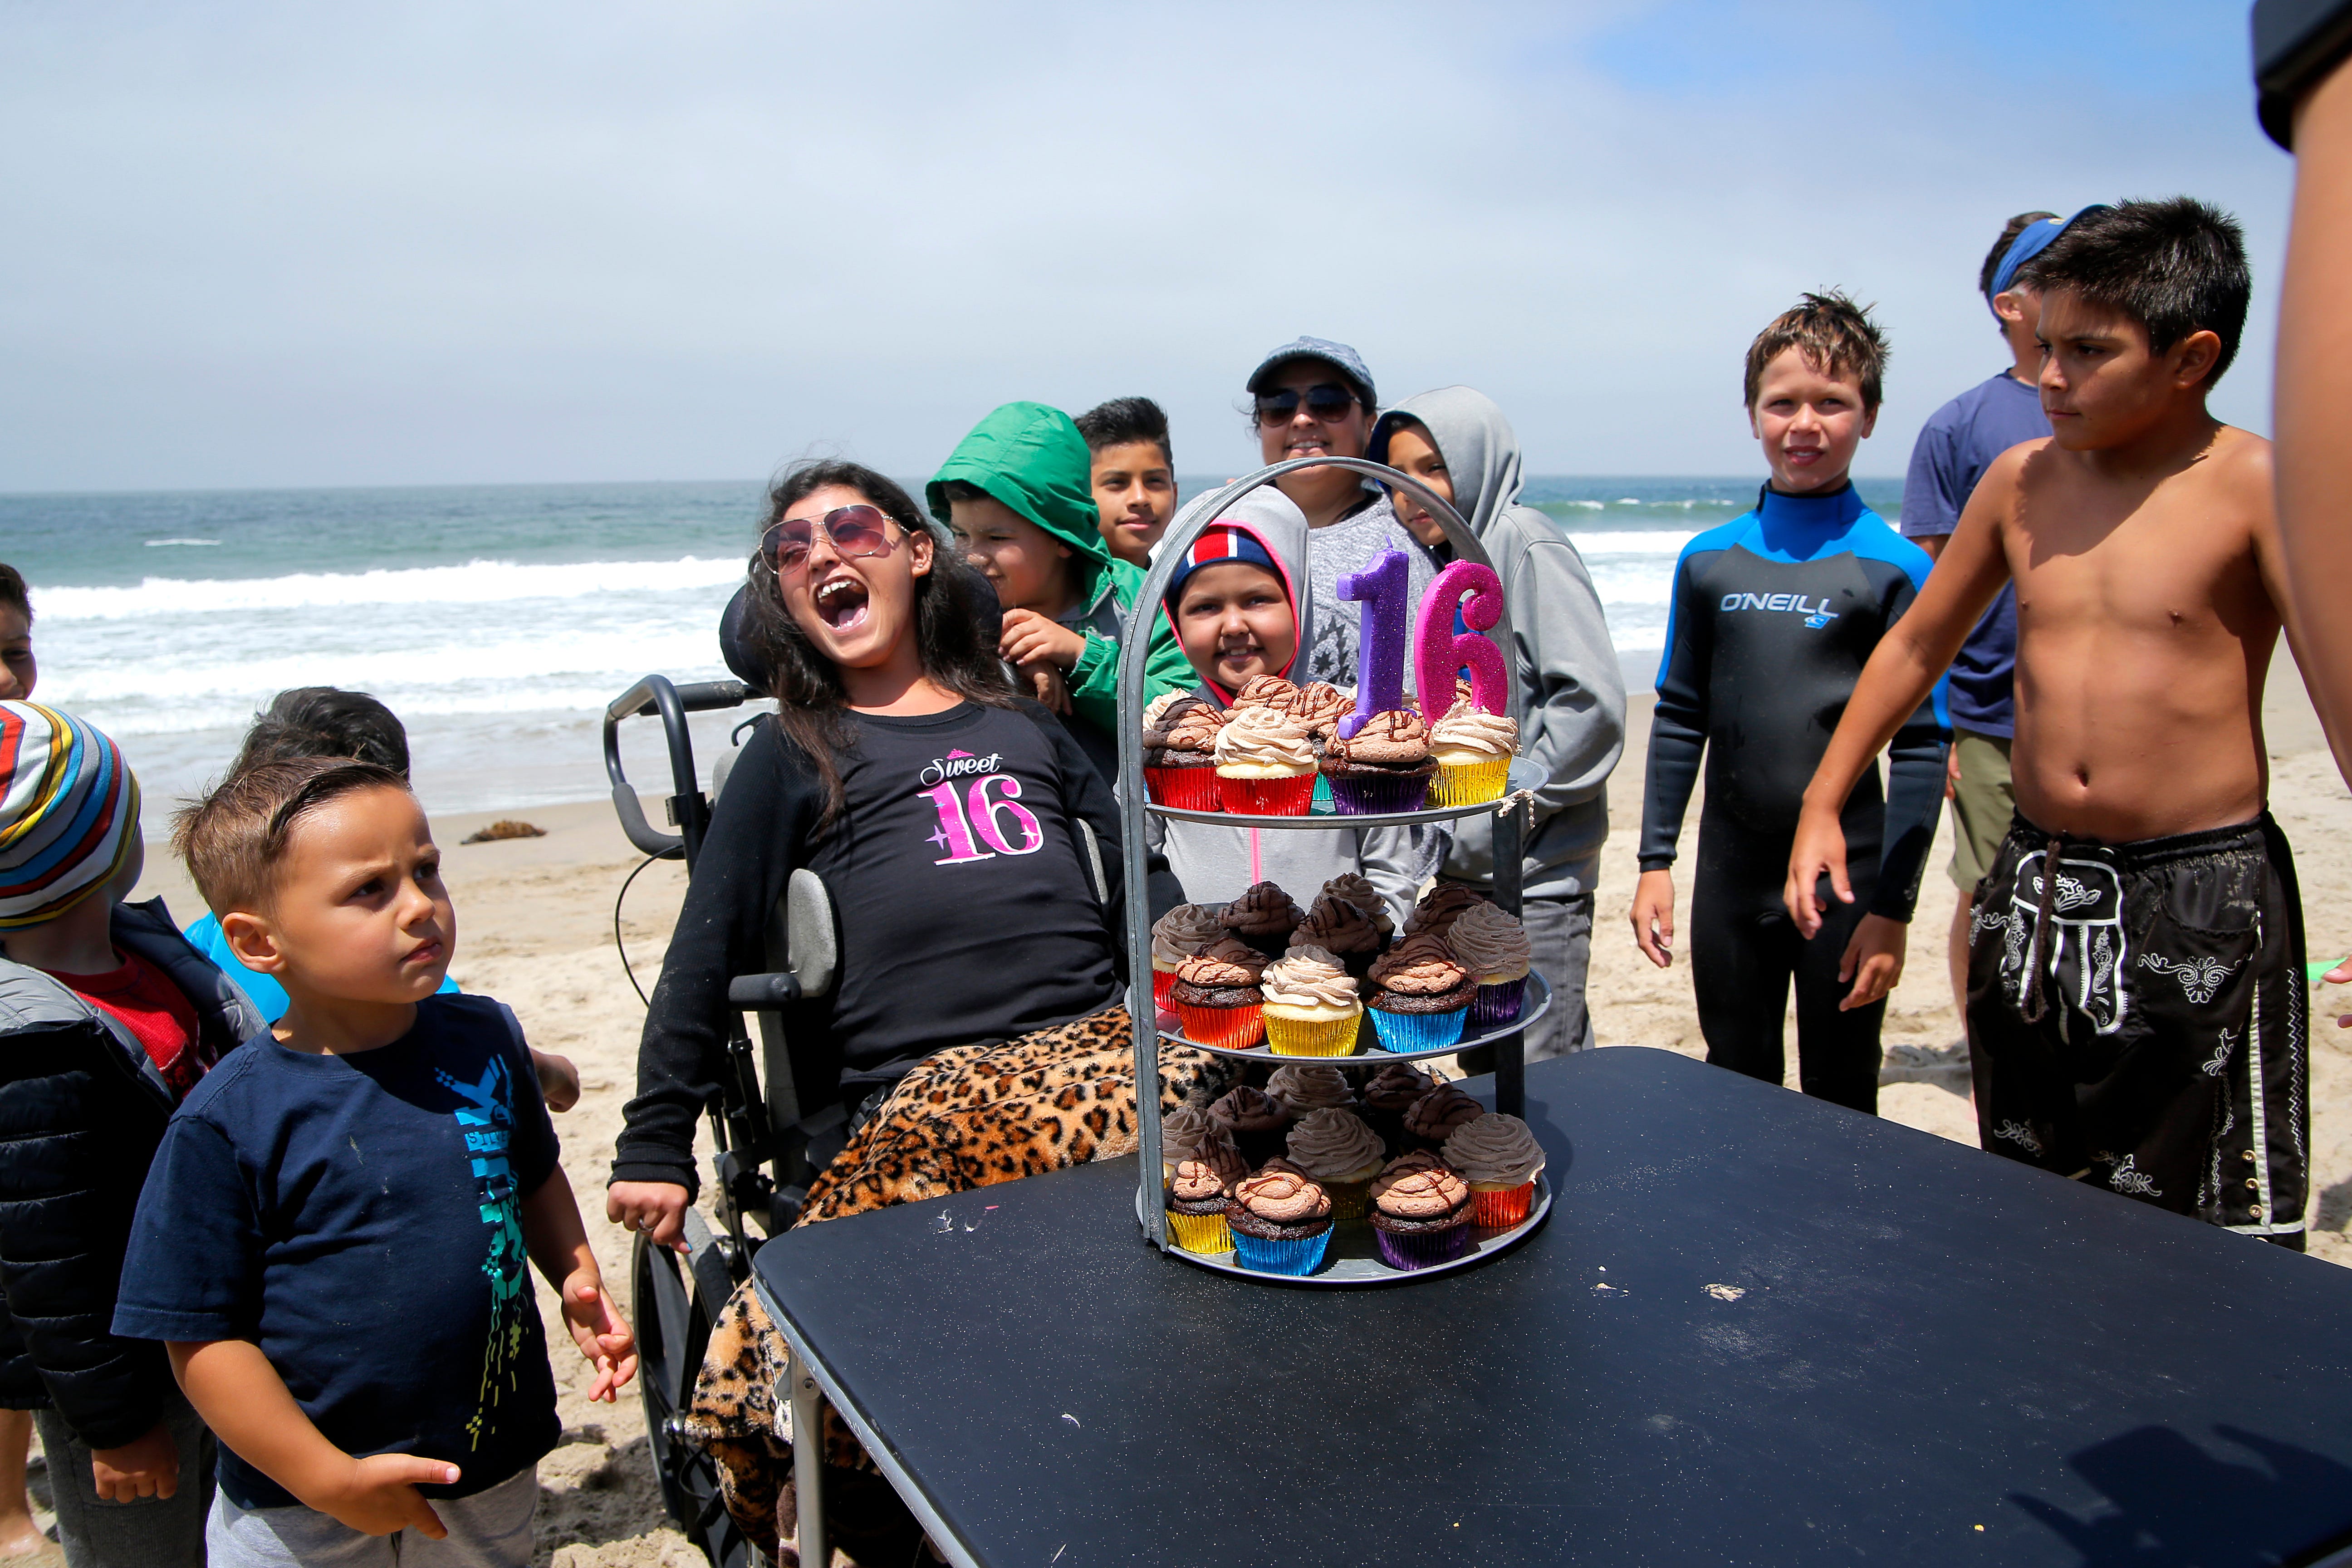 Karizma Vargas celebrates her 16th birthday party surrounded by friends and family on a beach in Monterey Bay.